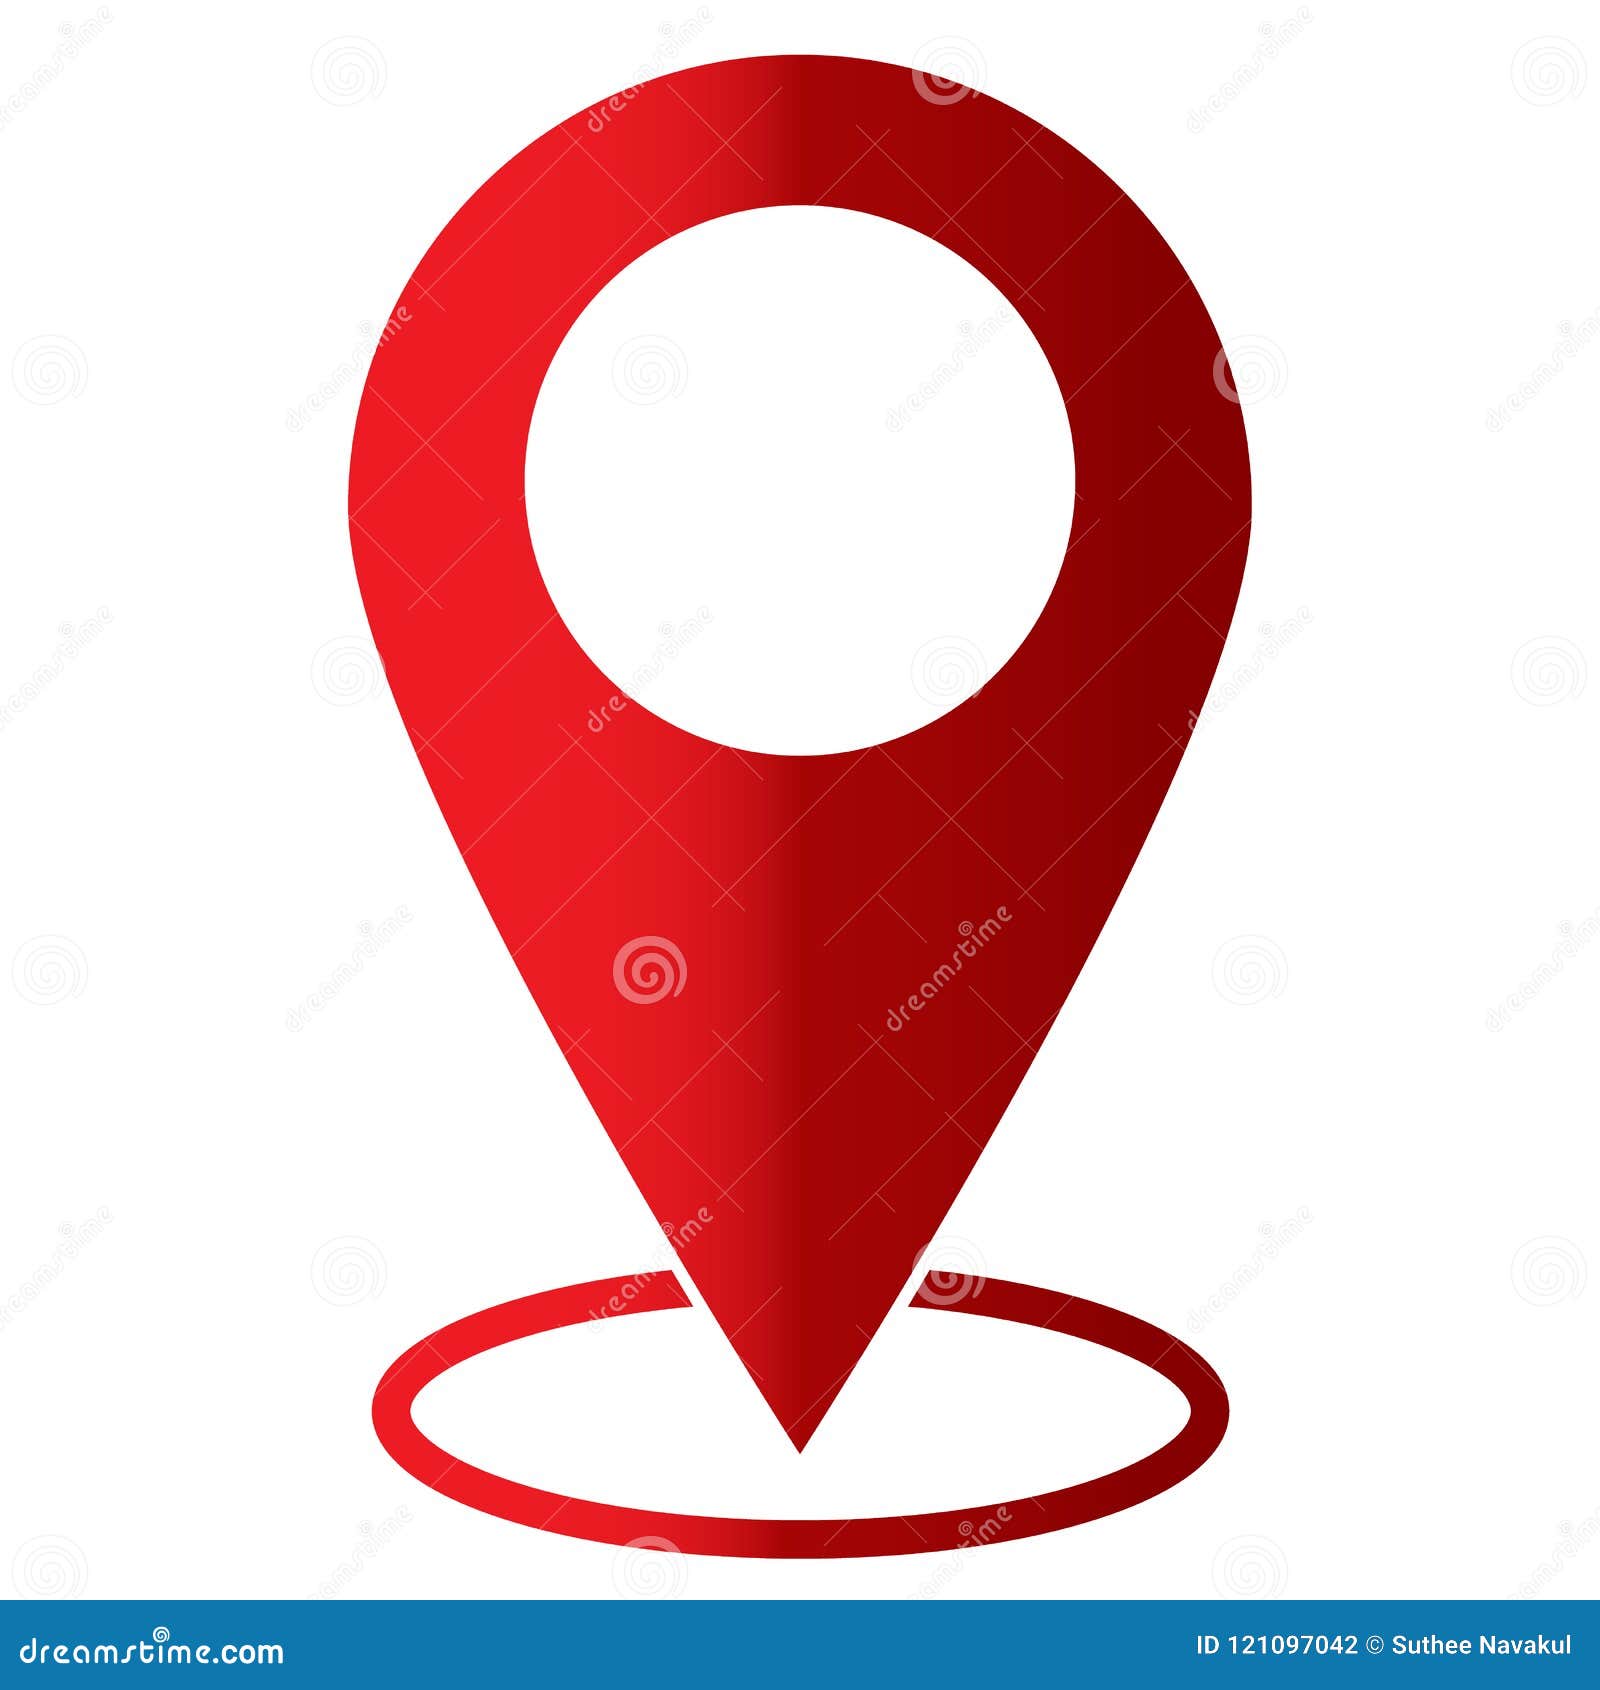 pin icon on white background. flat style. map sign.